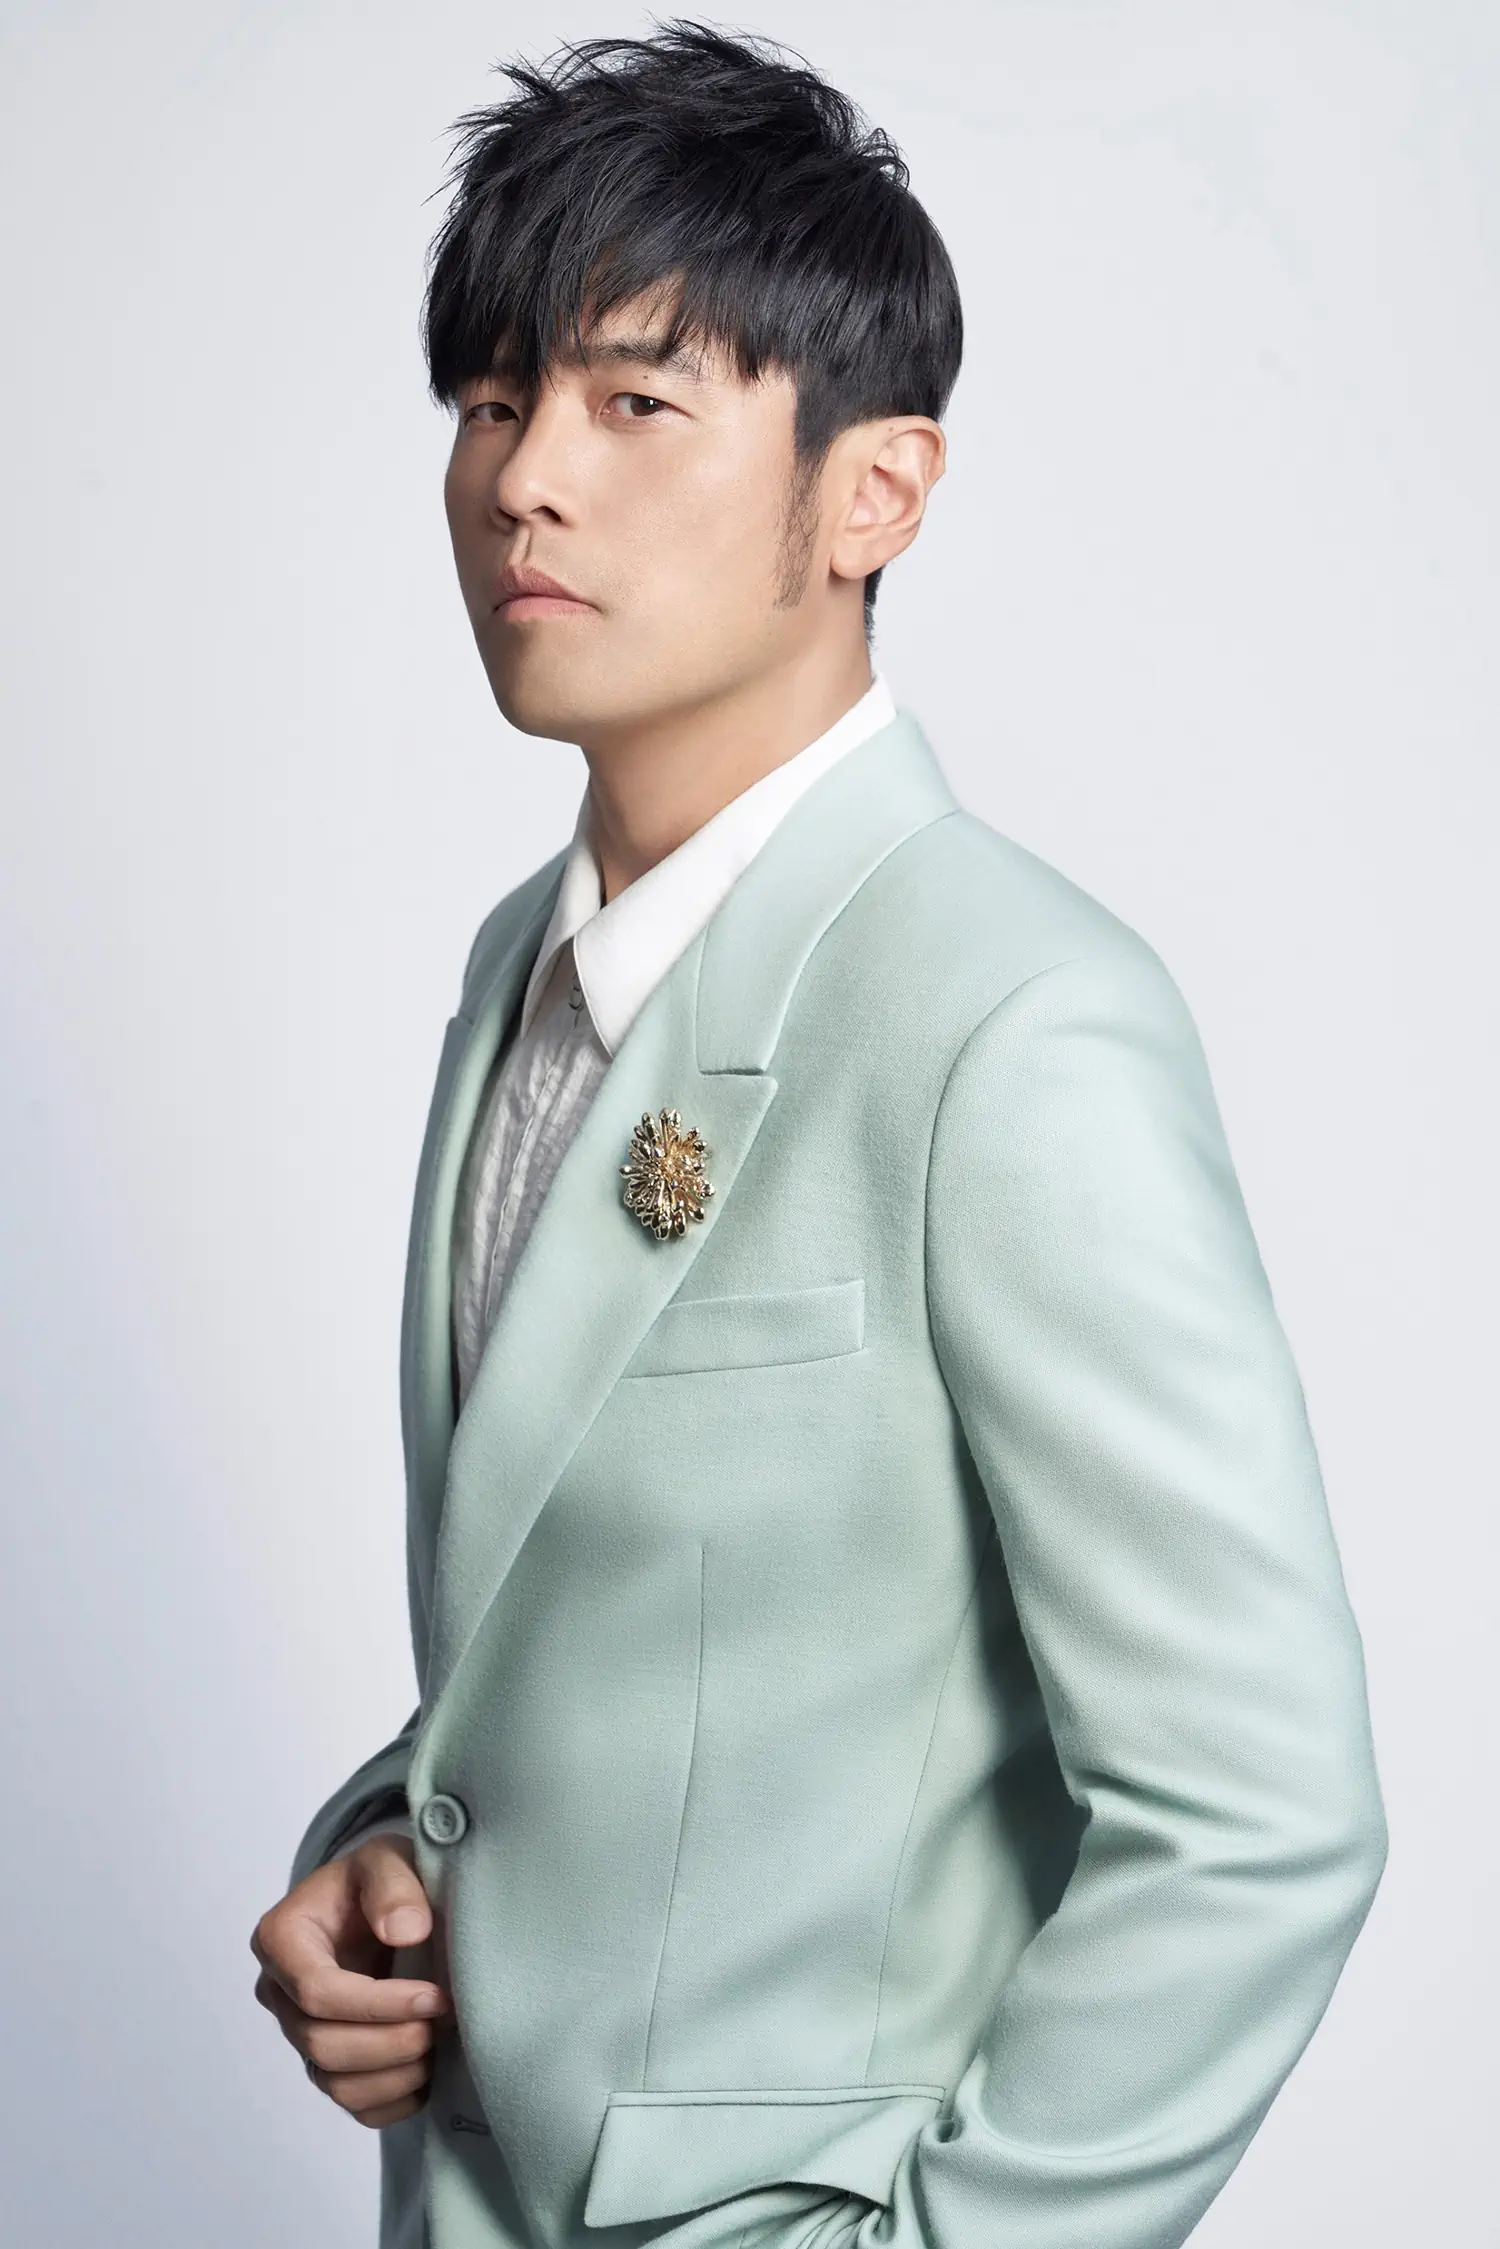 Dior Men welcomes Jay Chou to its family of global ambassadors